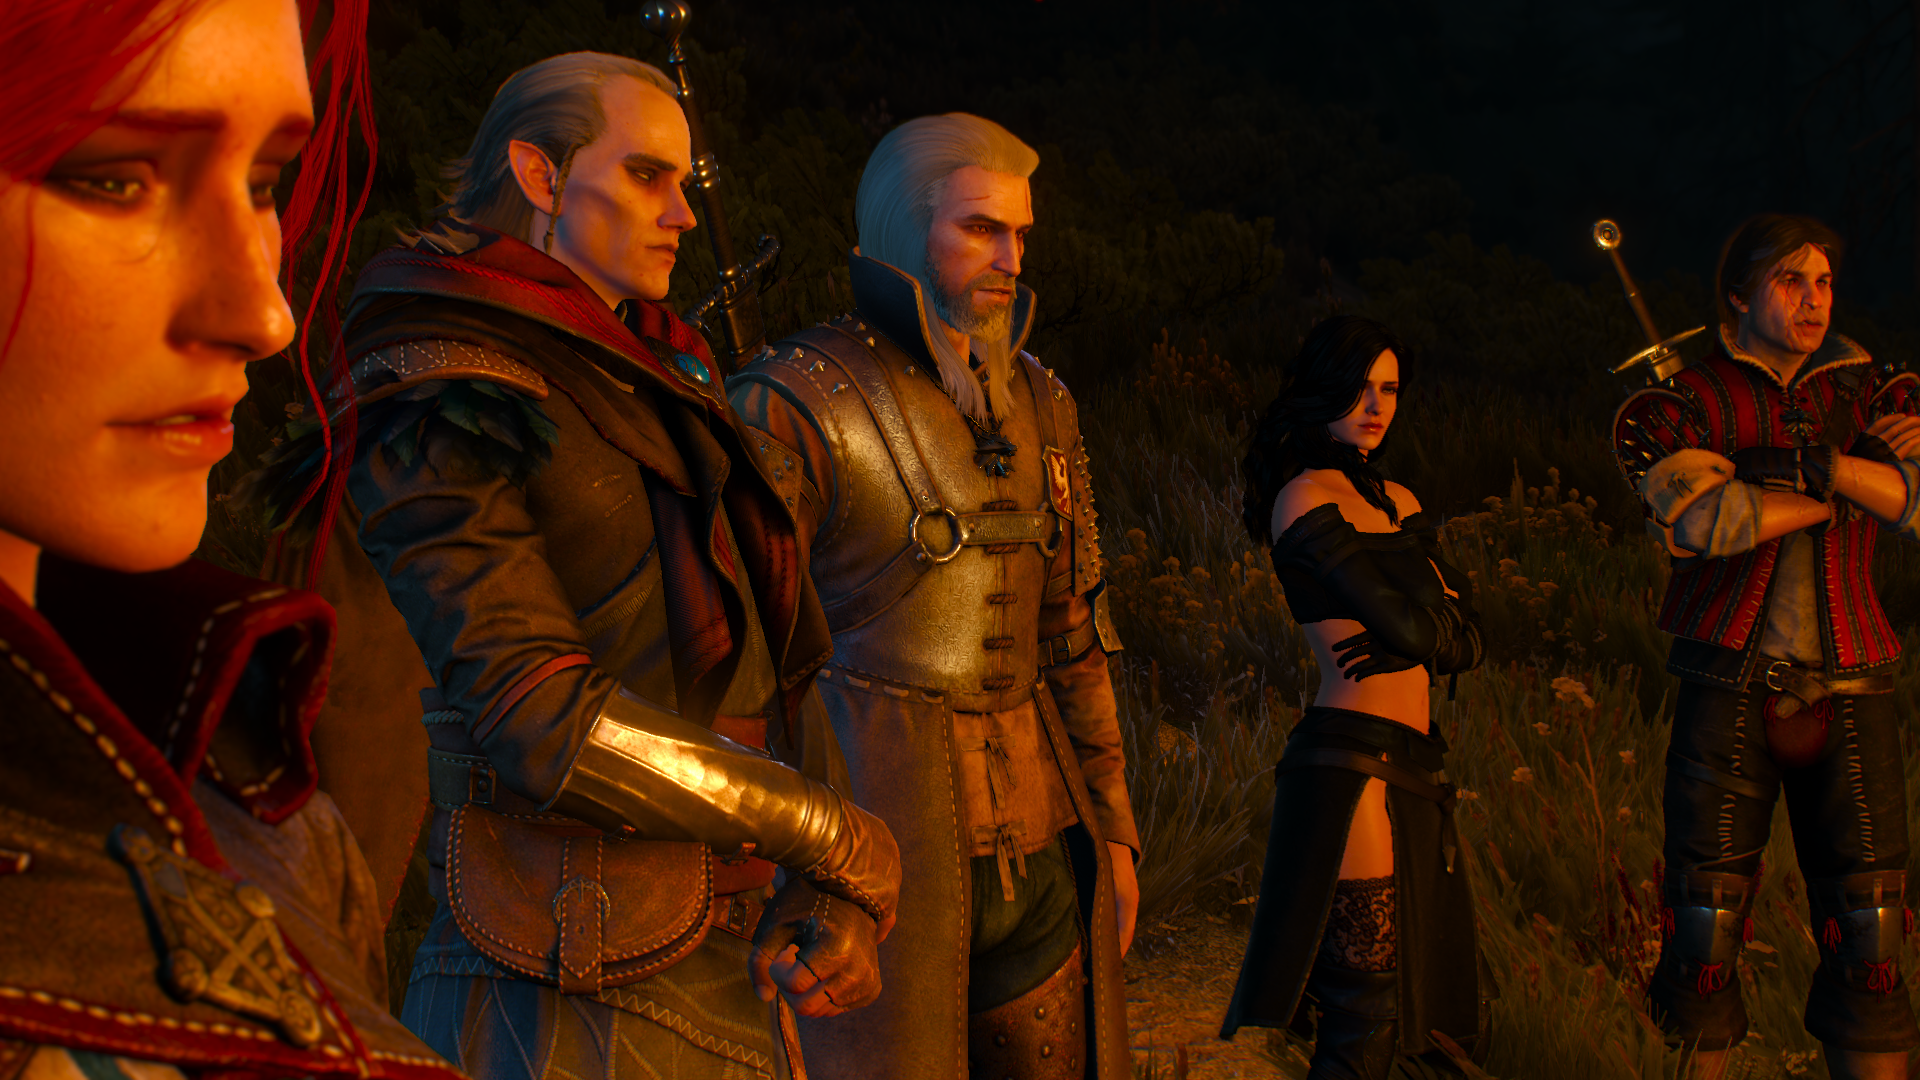 General 1920x1080 The Witcher 3: Wild Hunt Geralt of Rivia Avallac'h Yennefer of Vengerberg Triss Merigold Eskel video game characters video games